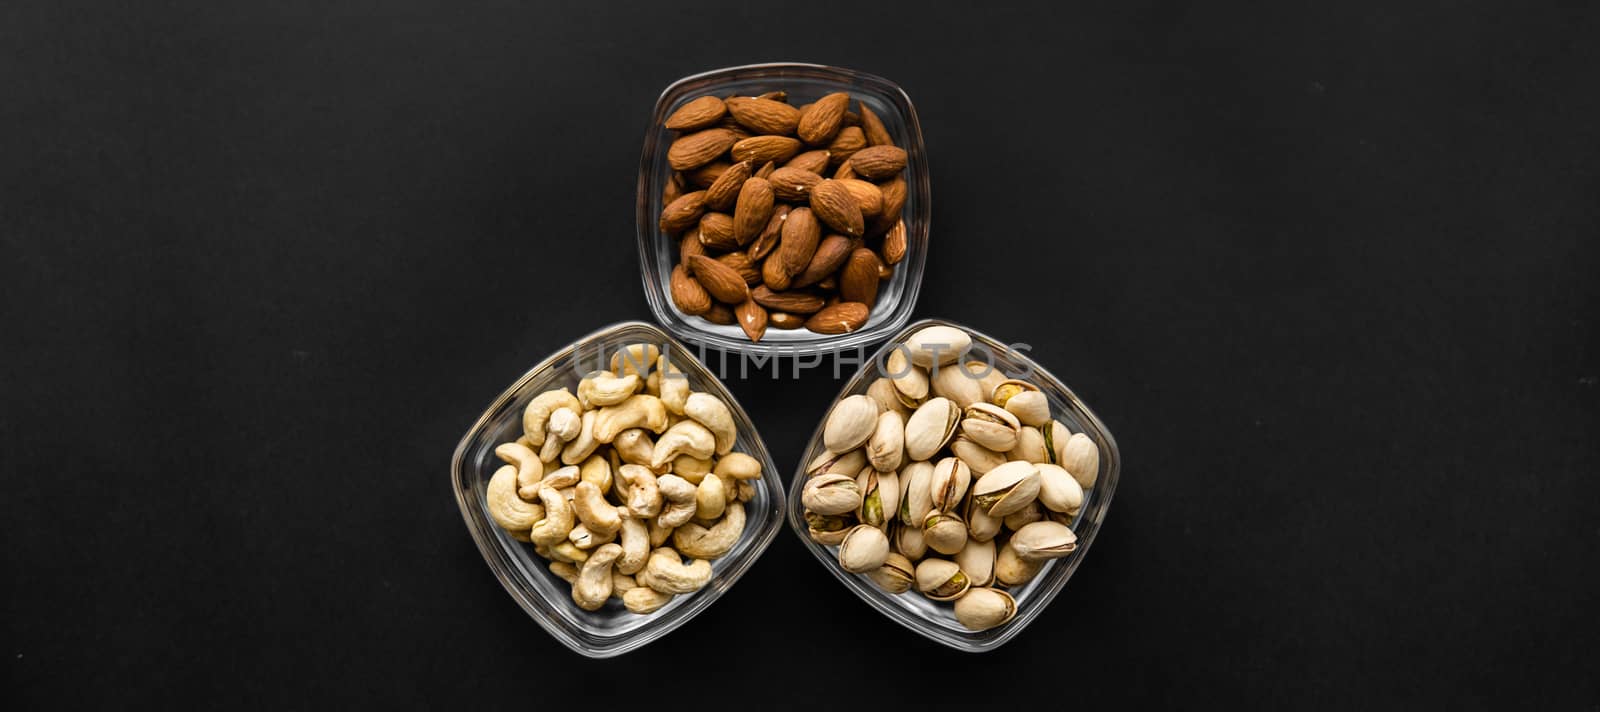 Almond, pistachio and cashew in a small plates which standing on a black table. Nuts is a healthy vegetarian protein and nutritious food. by vovsht